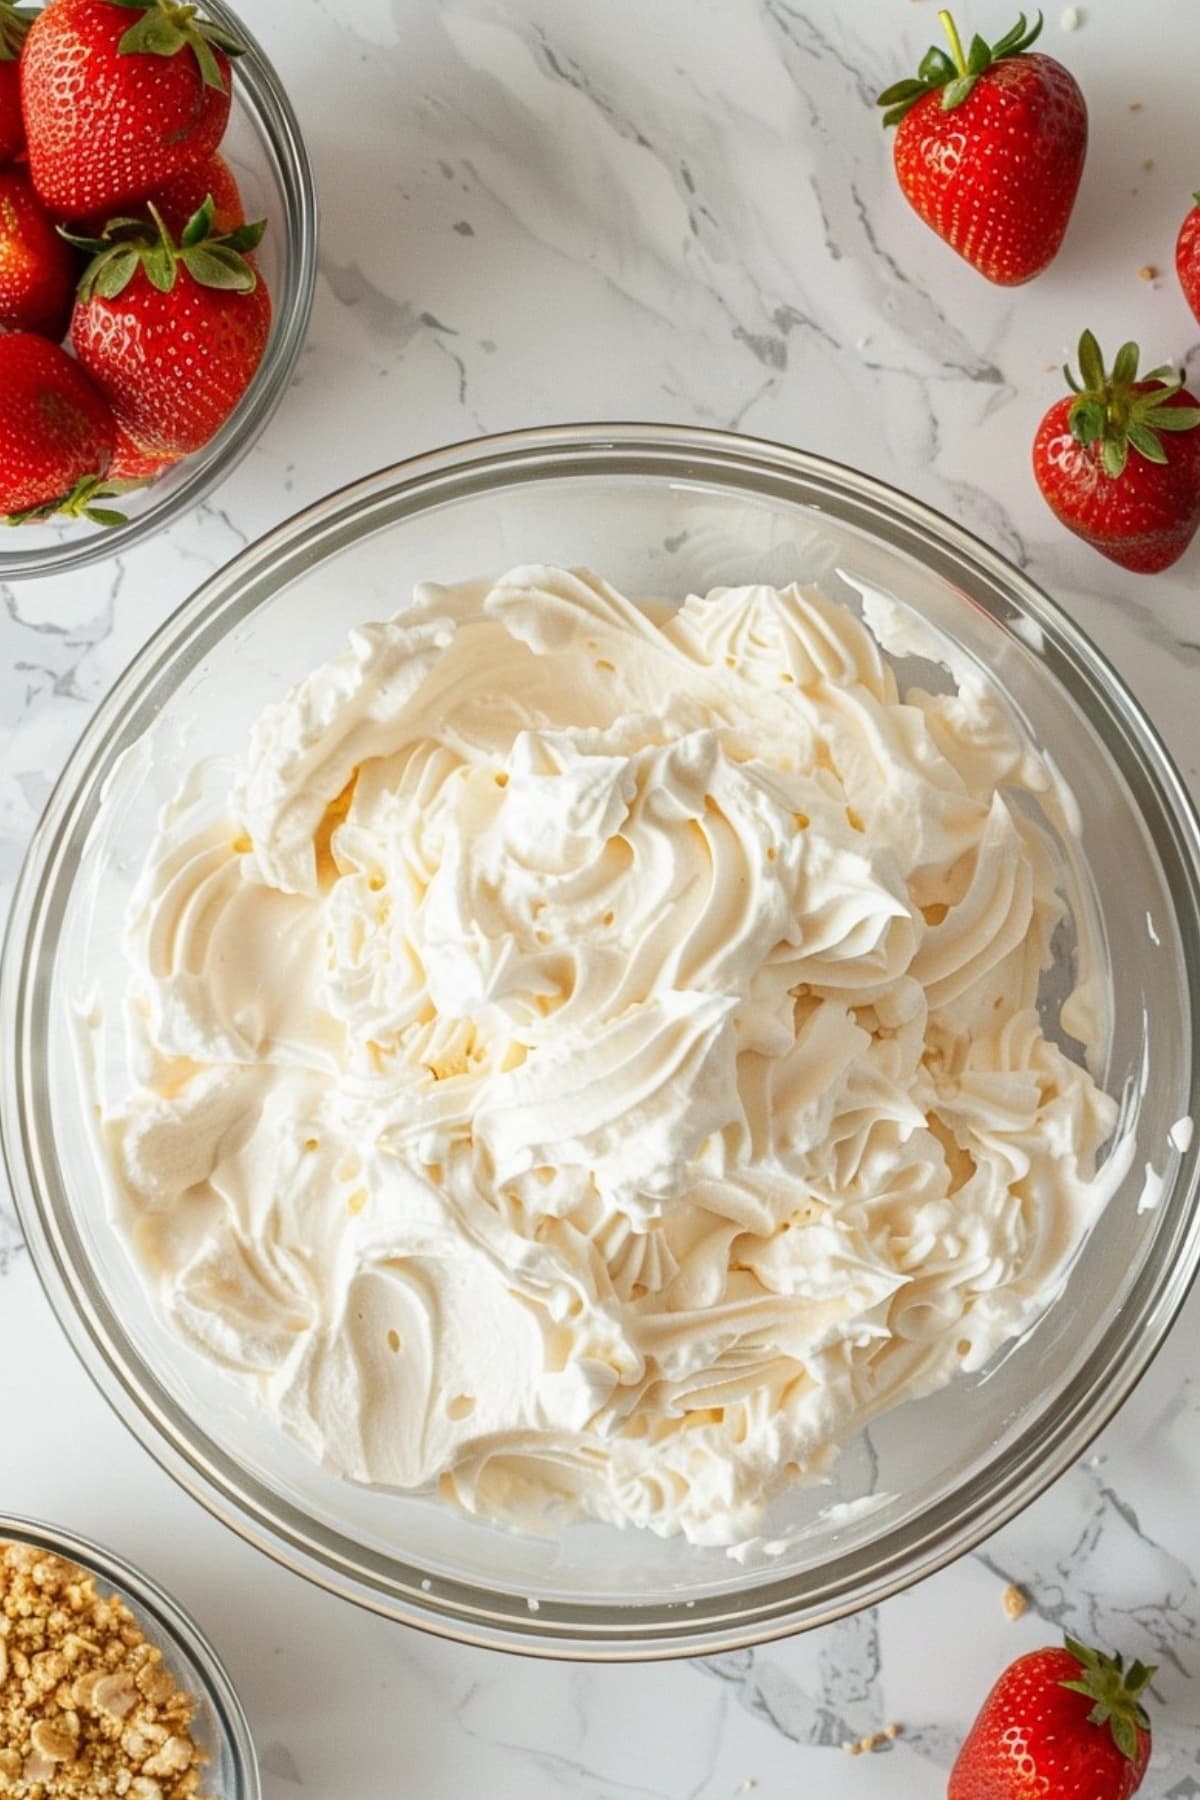 Whipped cream in a glass bowl with fresh strawberries and crush graham crackers on the side, top down view.